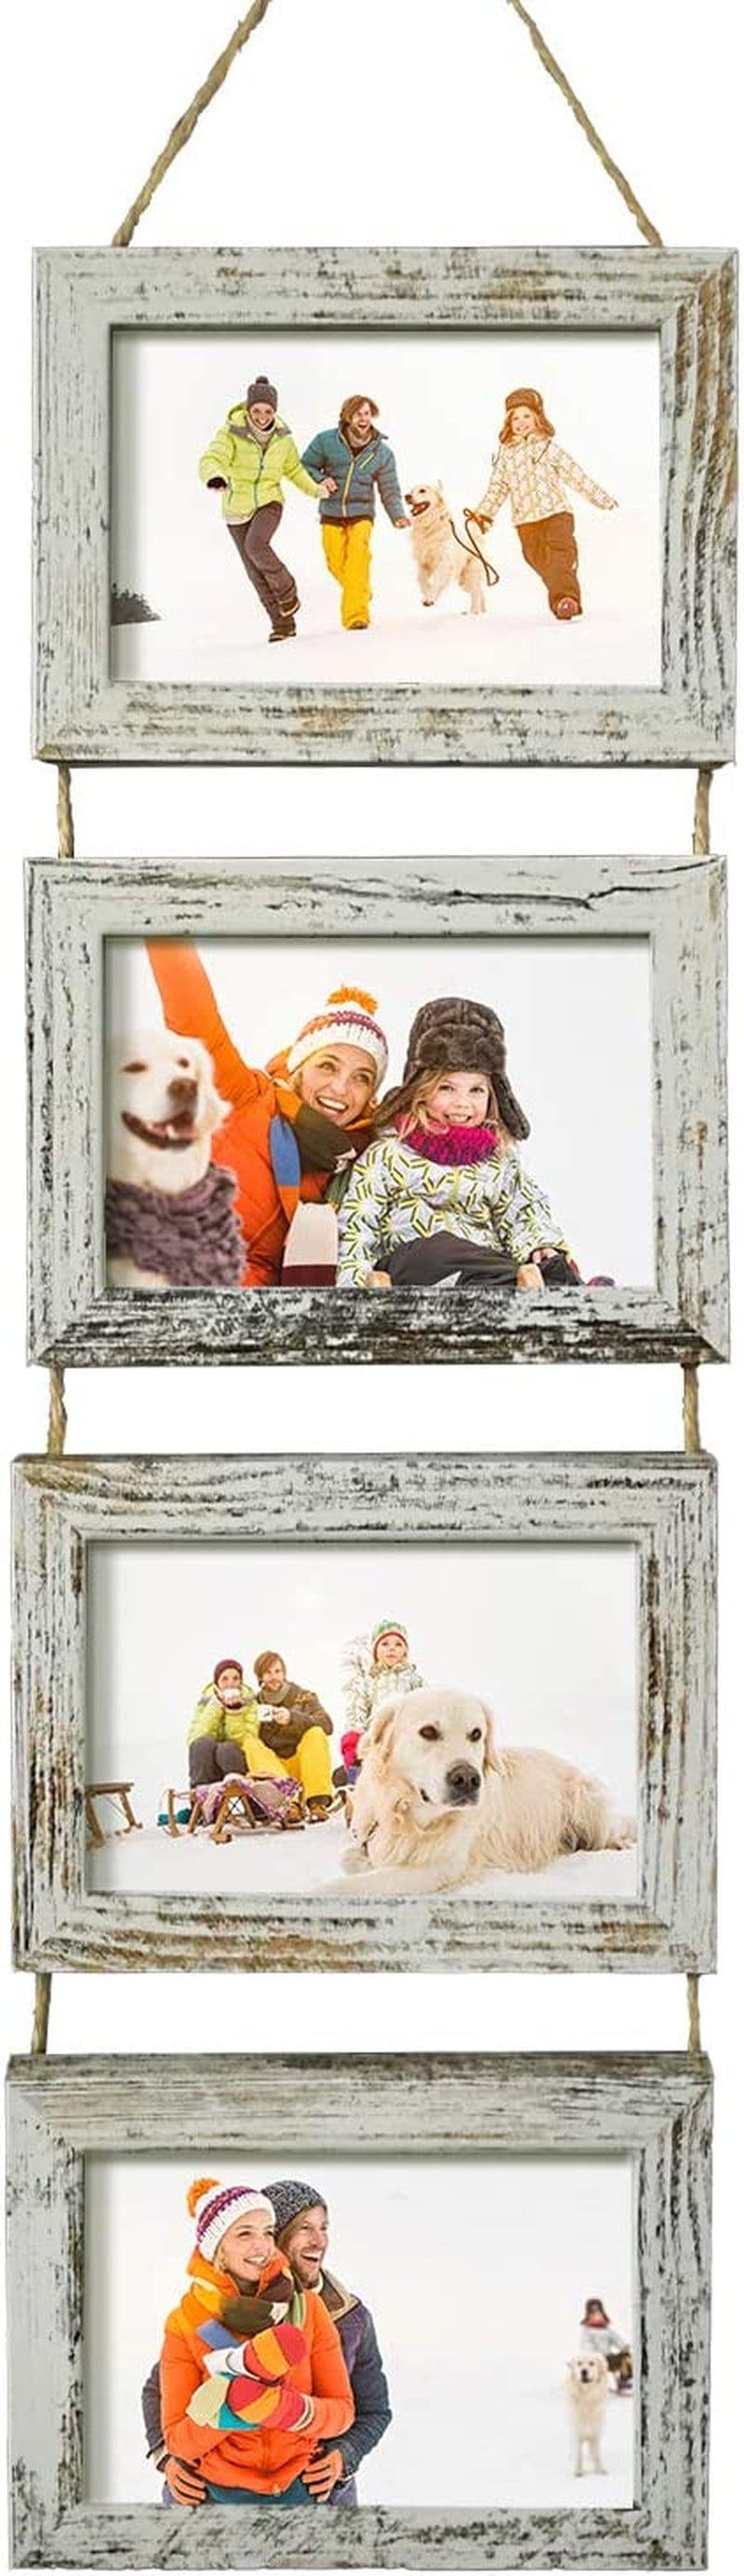 4X6 Wall Hanging Picture Frames Collage with 4 Opening Distressed White Frames